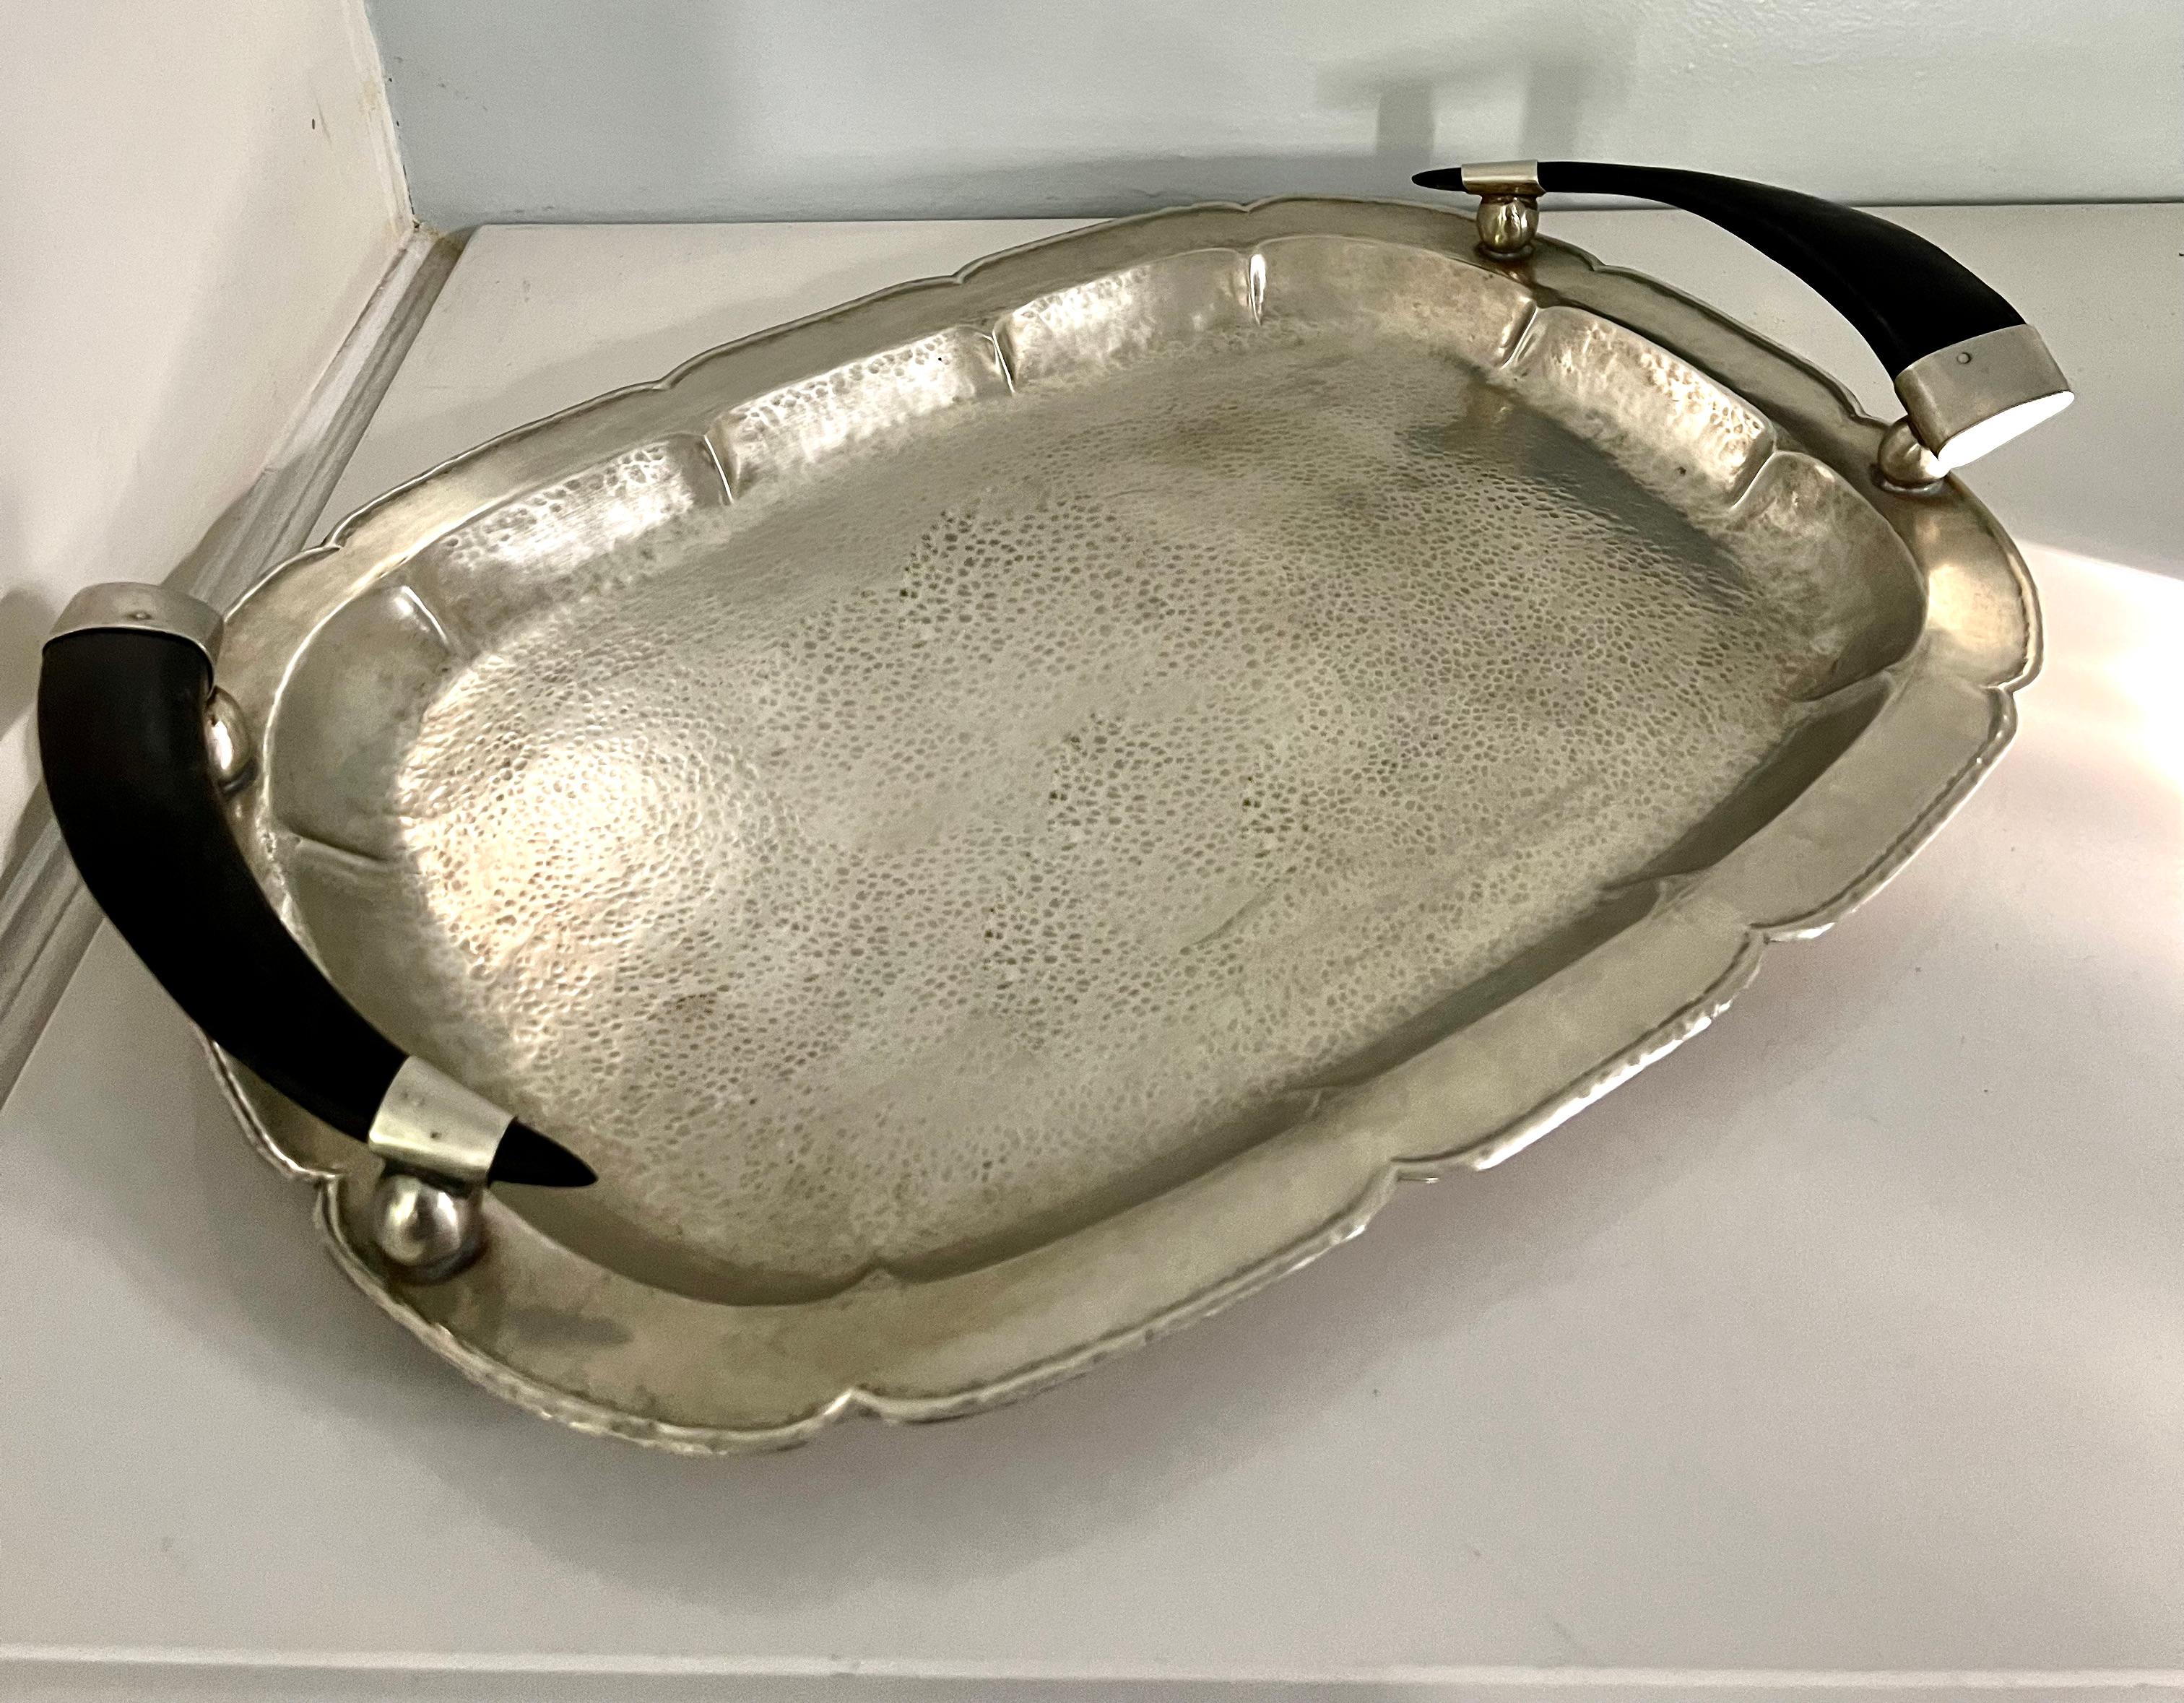 A wonderful Hammered Silver tray with Horn Handles - hand crafted in Argentina, made with carefully placed studs. We have left much of the patination as it serves the piece well.

A compliment to many settings, but we find it most attractive in a